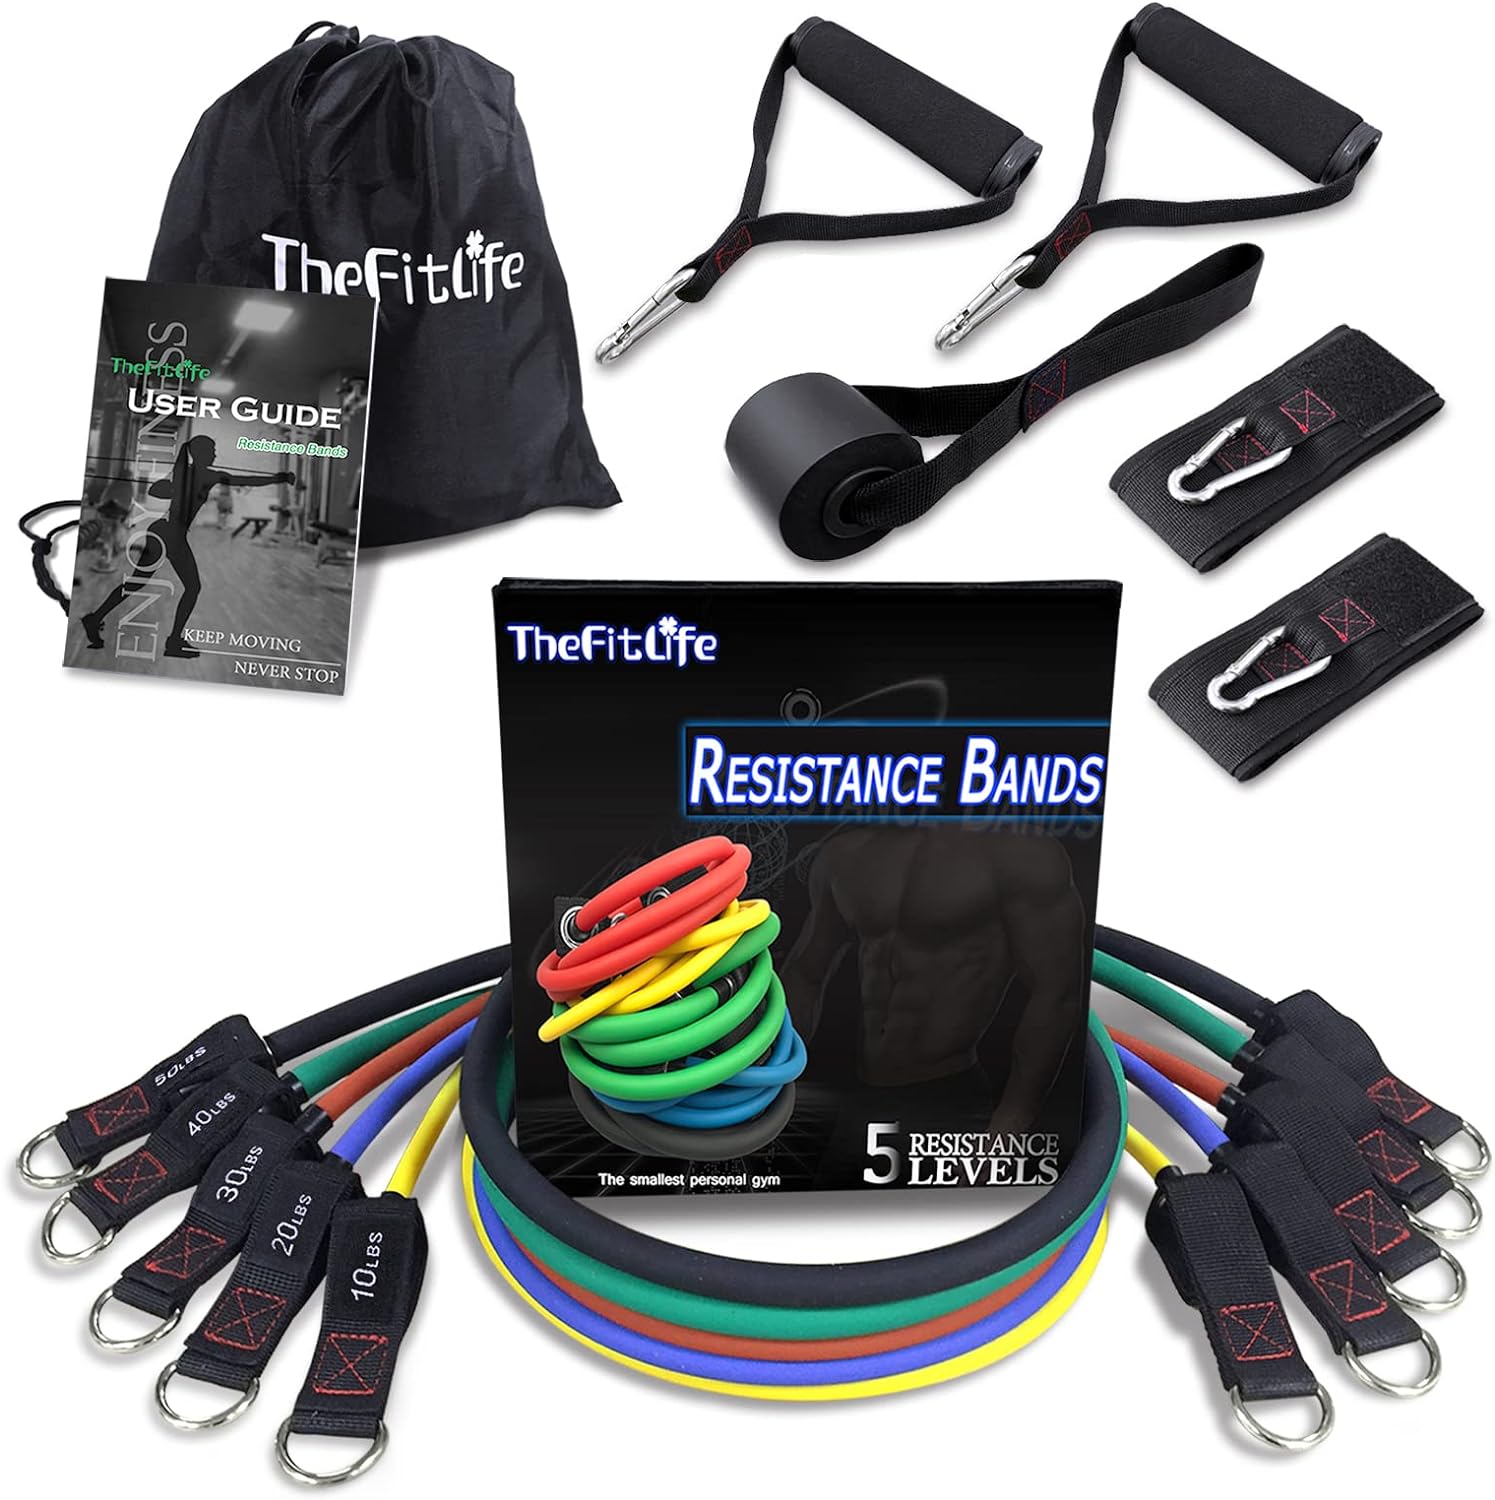 TheFitLife Exercise and Resistance Bands Set - 5 Fitness stackable up to 110/150/200/250/300 lbs Workout Tubes for Indoor and Outdoor Sports, Fitness, Suspension, Speed Strength, Baseball Softball Training, Home Gym, Yoga